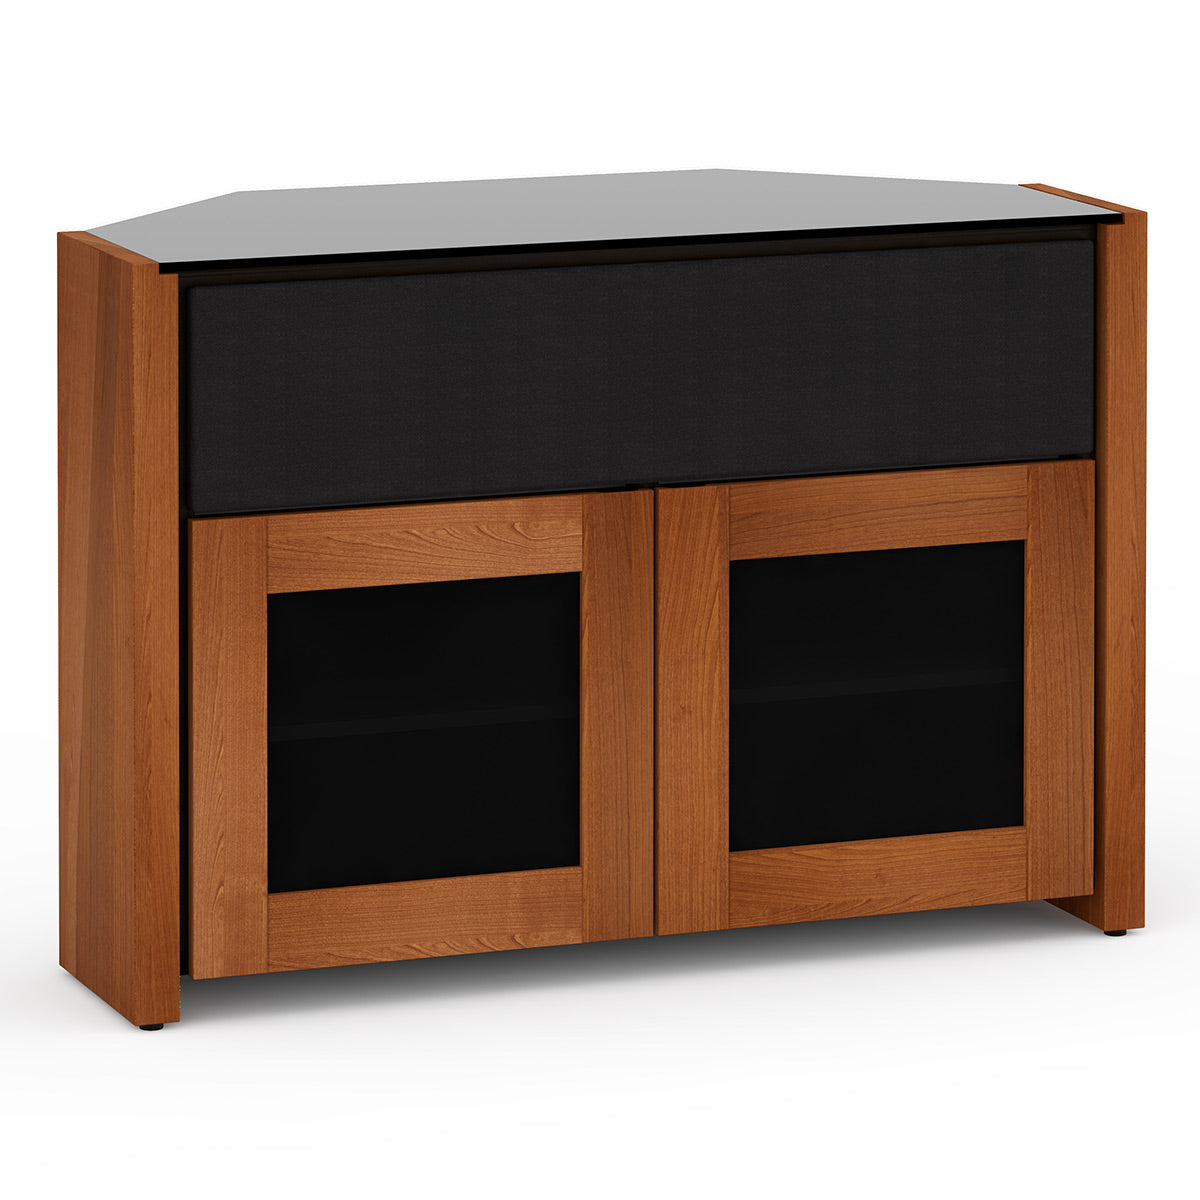 Salamander Chameleon Collection Corsica 329 Twin Speaker Integrated Corner Cabinet (Thick Cherry with Black Glass Top)